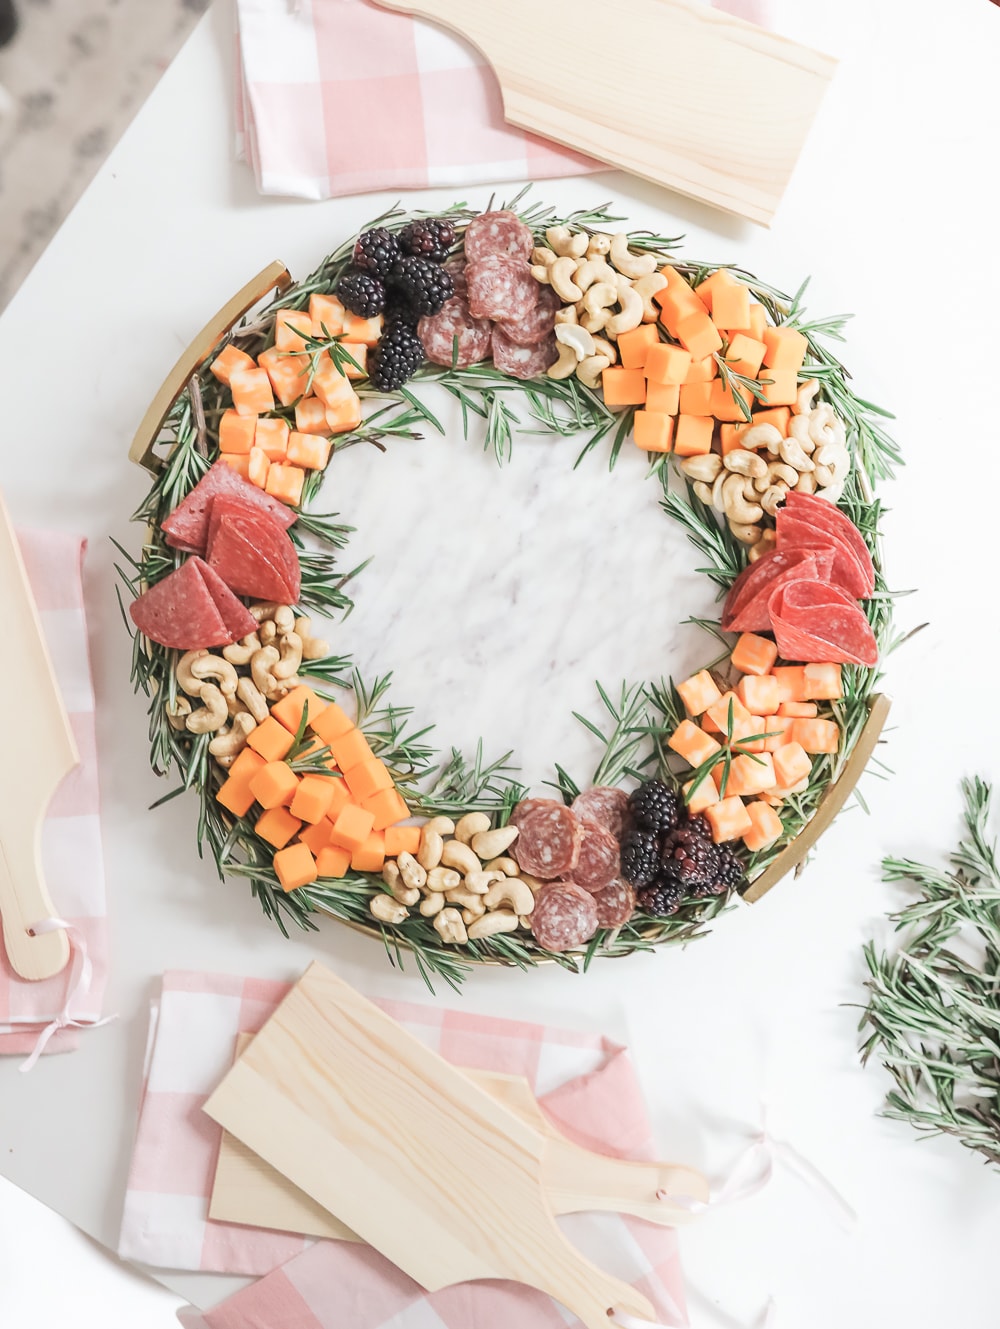 Blogger Stephanie Ziajka shares some cheese board ideas for Christmas on Diary of a Debutante